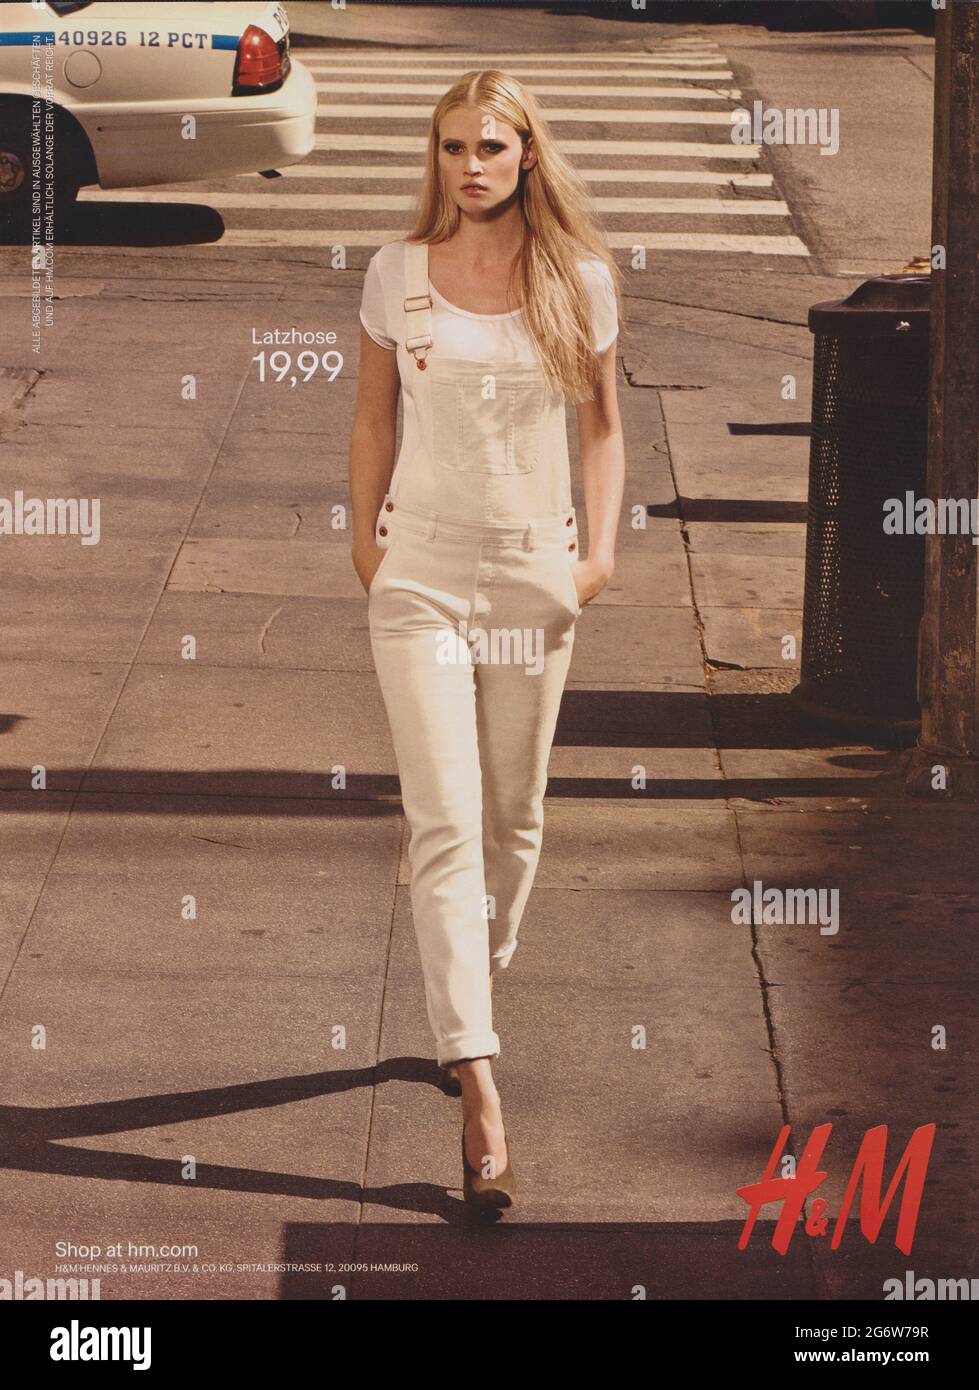 poster advertising H&M with Lara Stone in paper magazine from 2015 year, advertisement, creative Hennes & Mauritz advert from 2010s Stock Photo